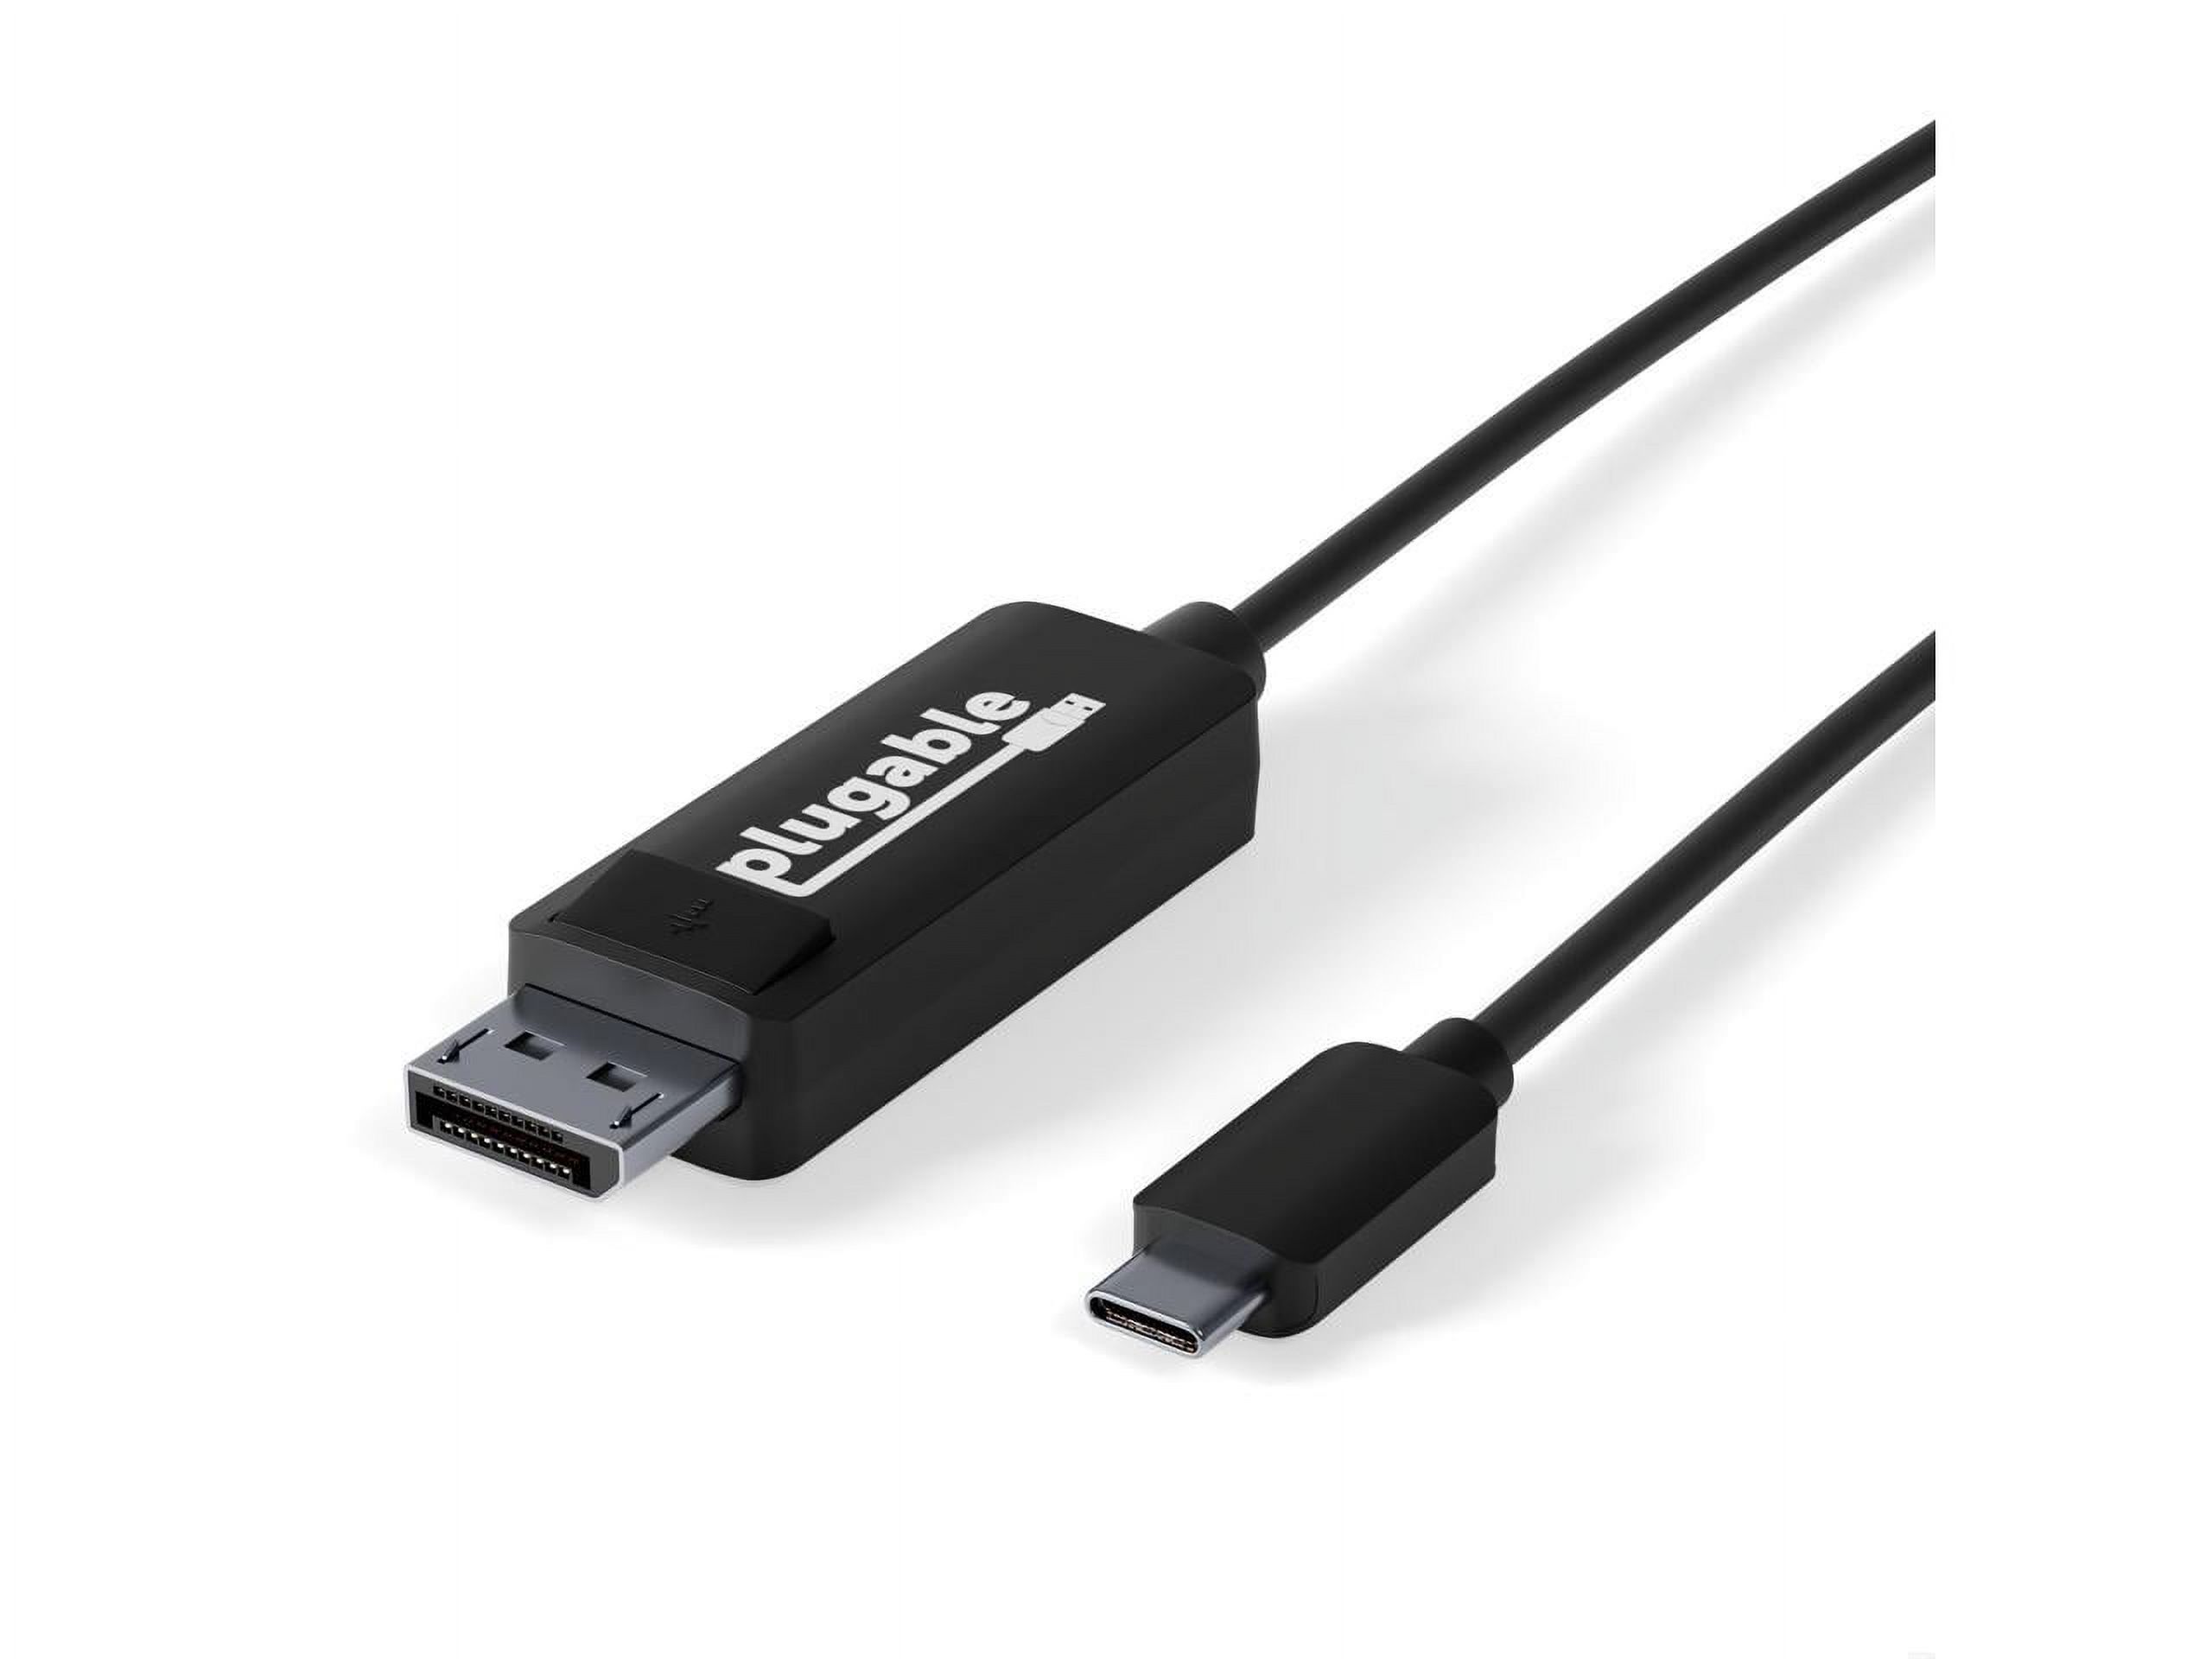 Plugable USB C to DisplayPort Cable 6 feet (1.8m), Up to 4K at 60Hz, USB C DisplayPort Cable - Compatible with Thunderbolt and USB-C - Driverless - image 1 of 7